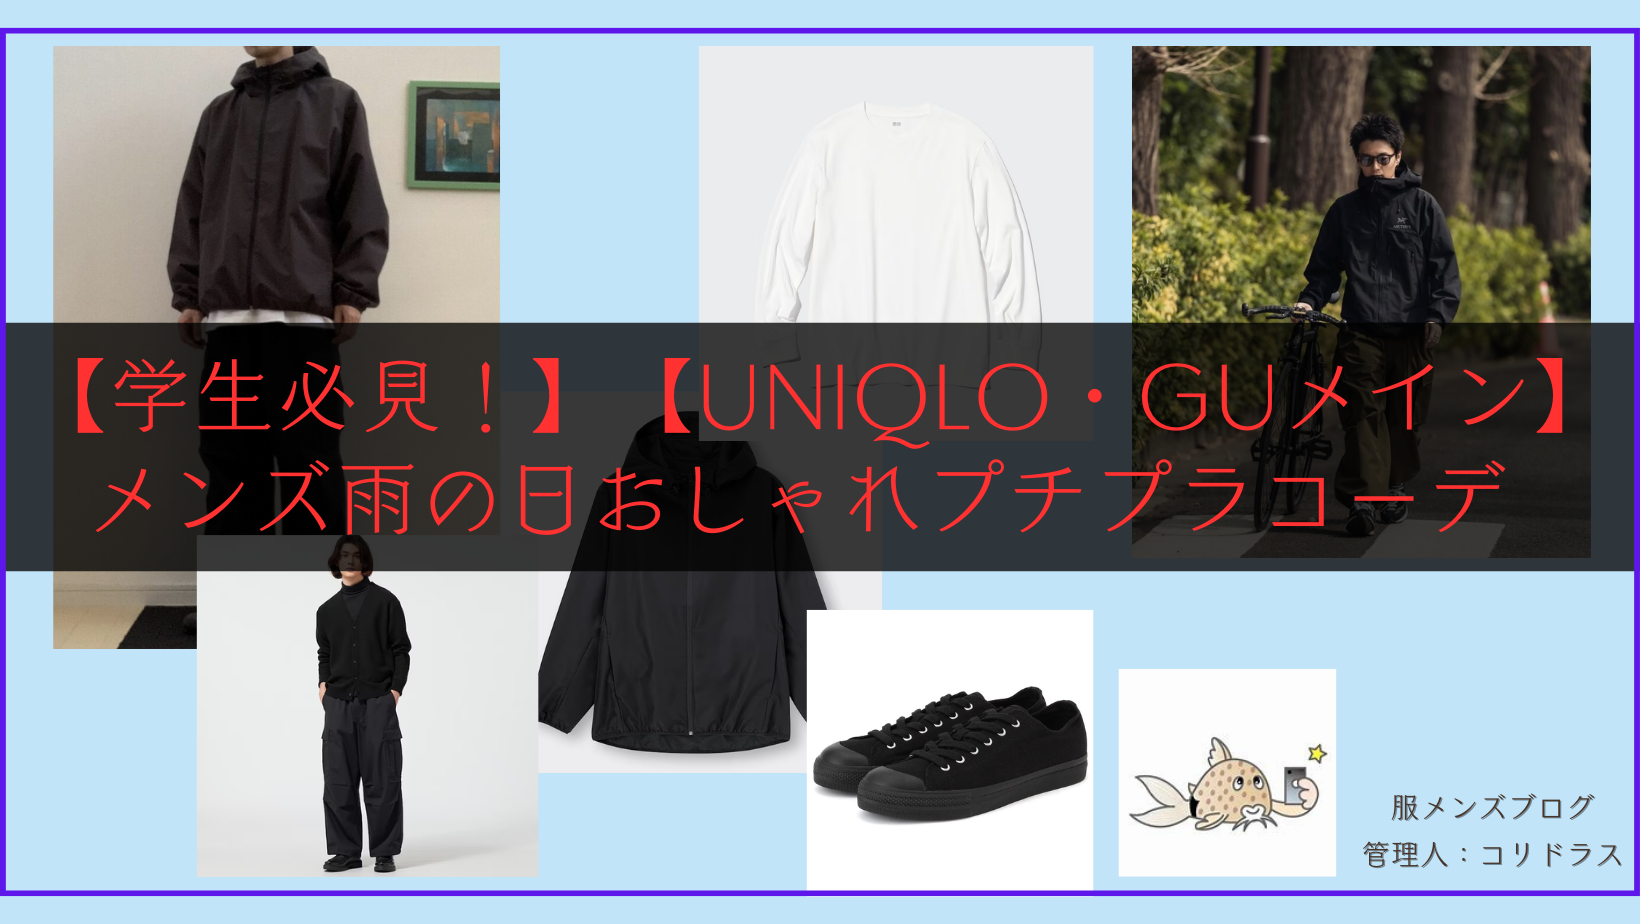 [Must-see for students! ] [UNIQLO・GU Main] "Men's rainy day stylish affordable outfit"